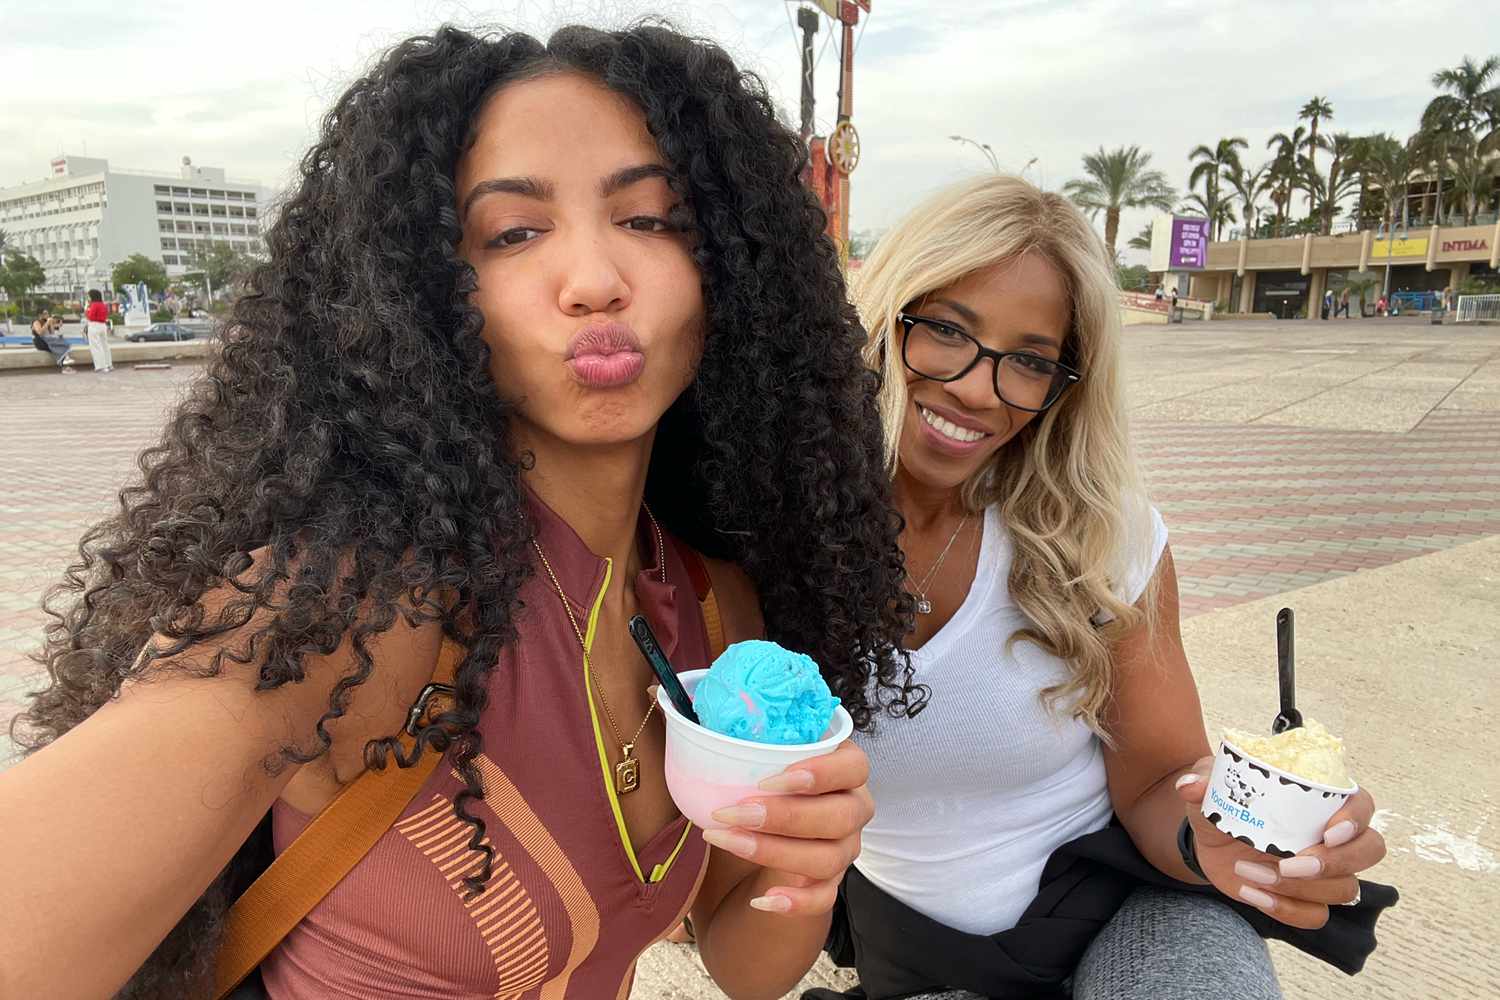 Cheslie and April in Israel